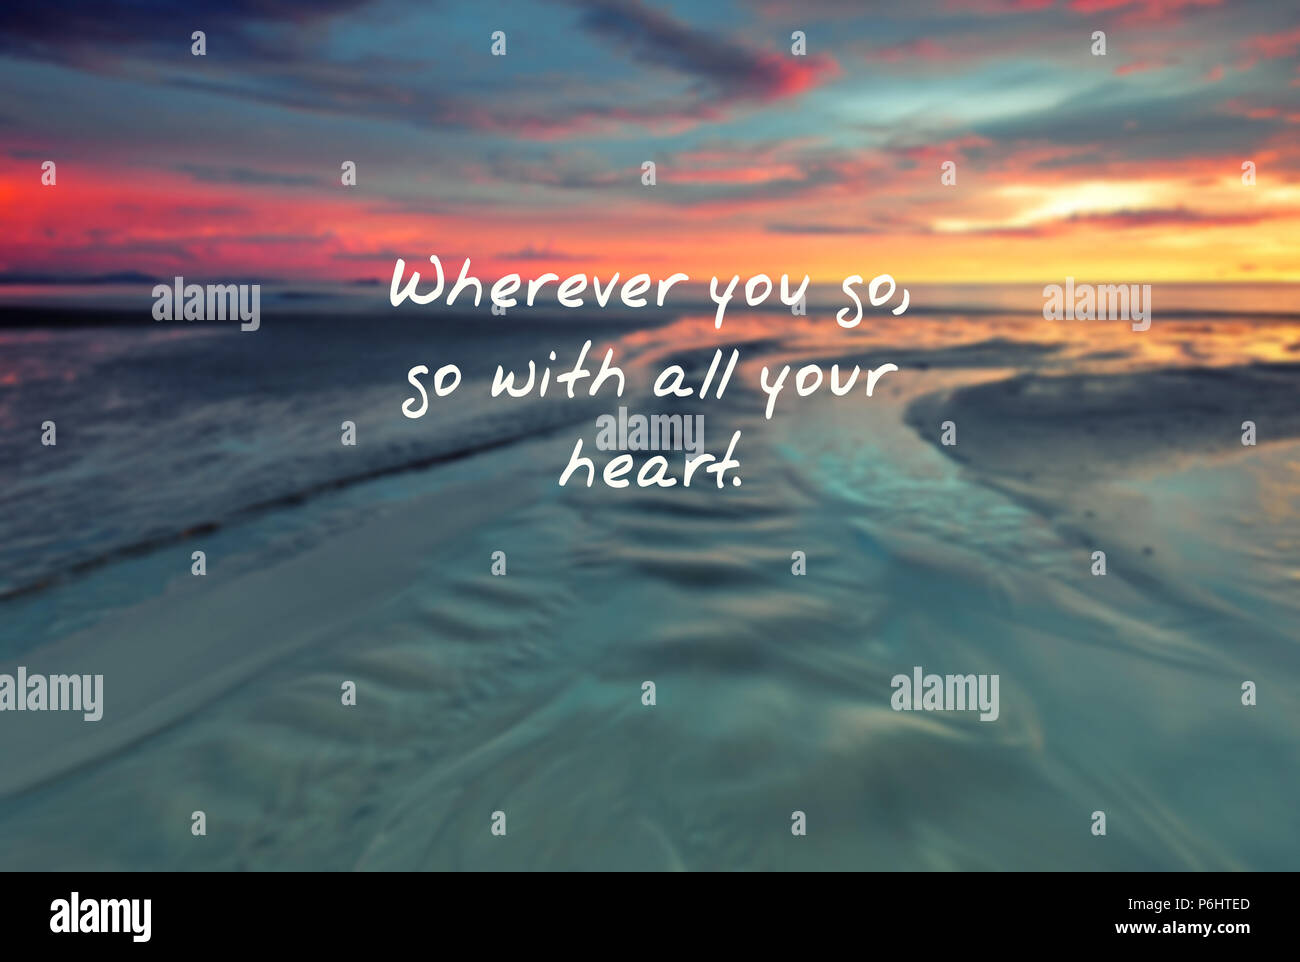 Travel motivational and inspiration quote- Whenever you go, go with all your heart. Retro style Stock Photo